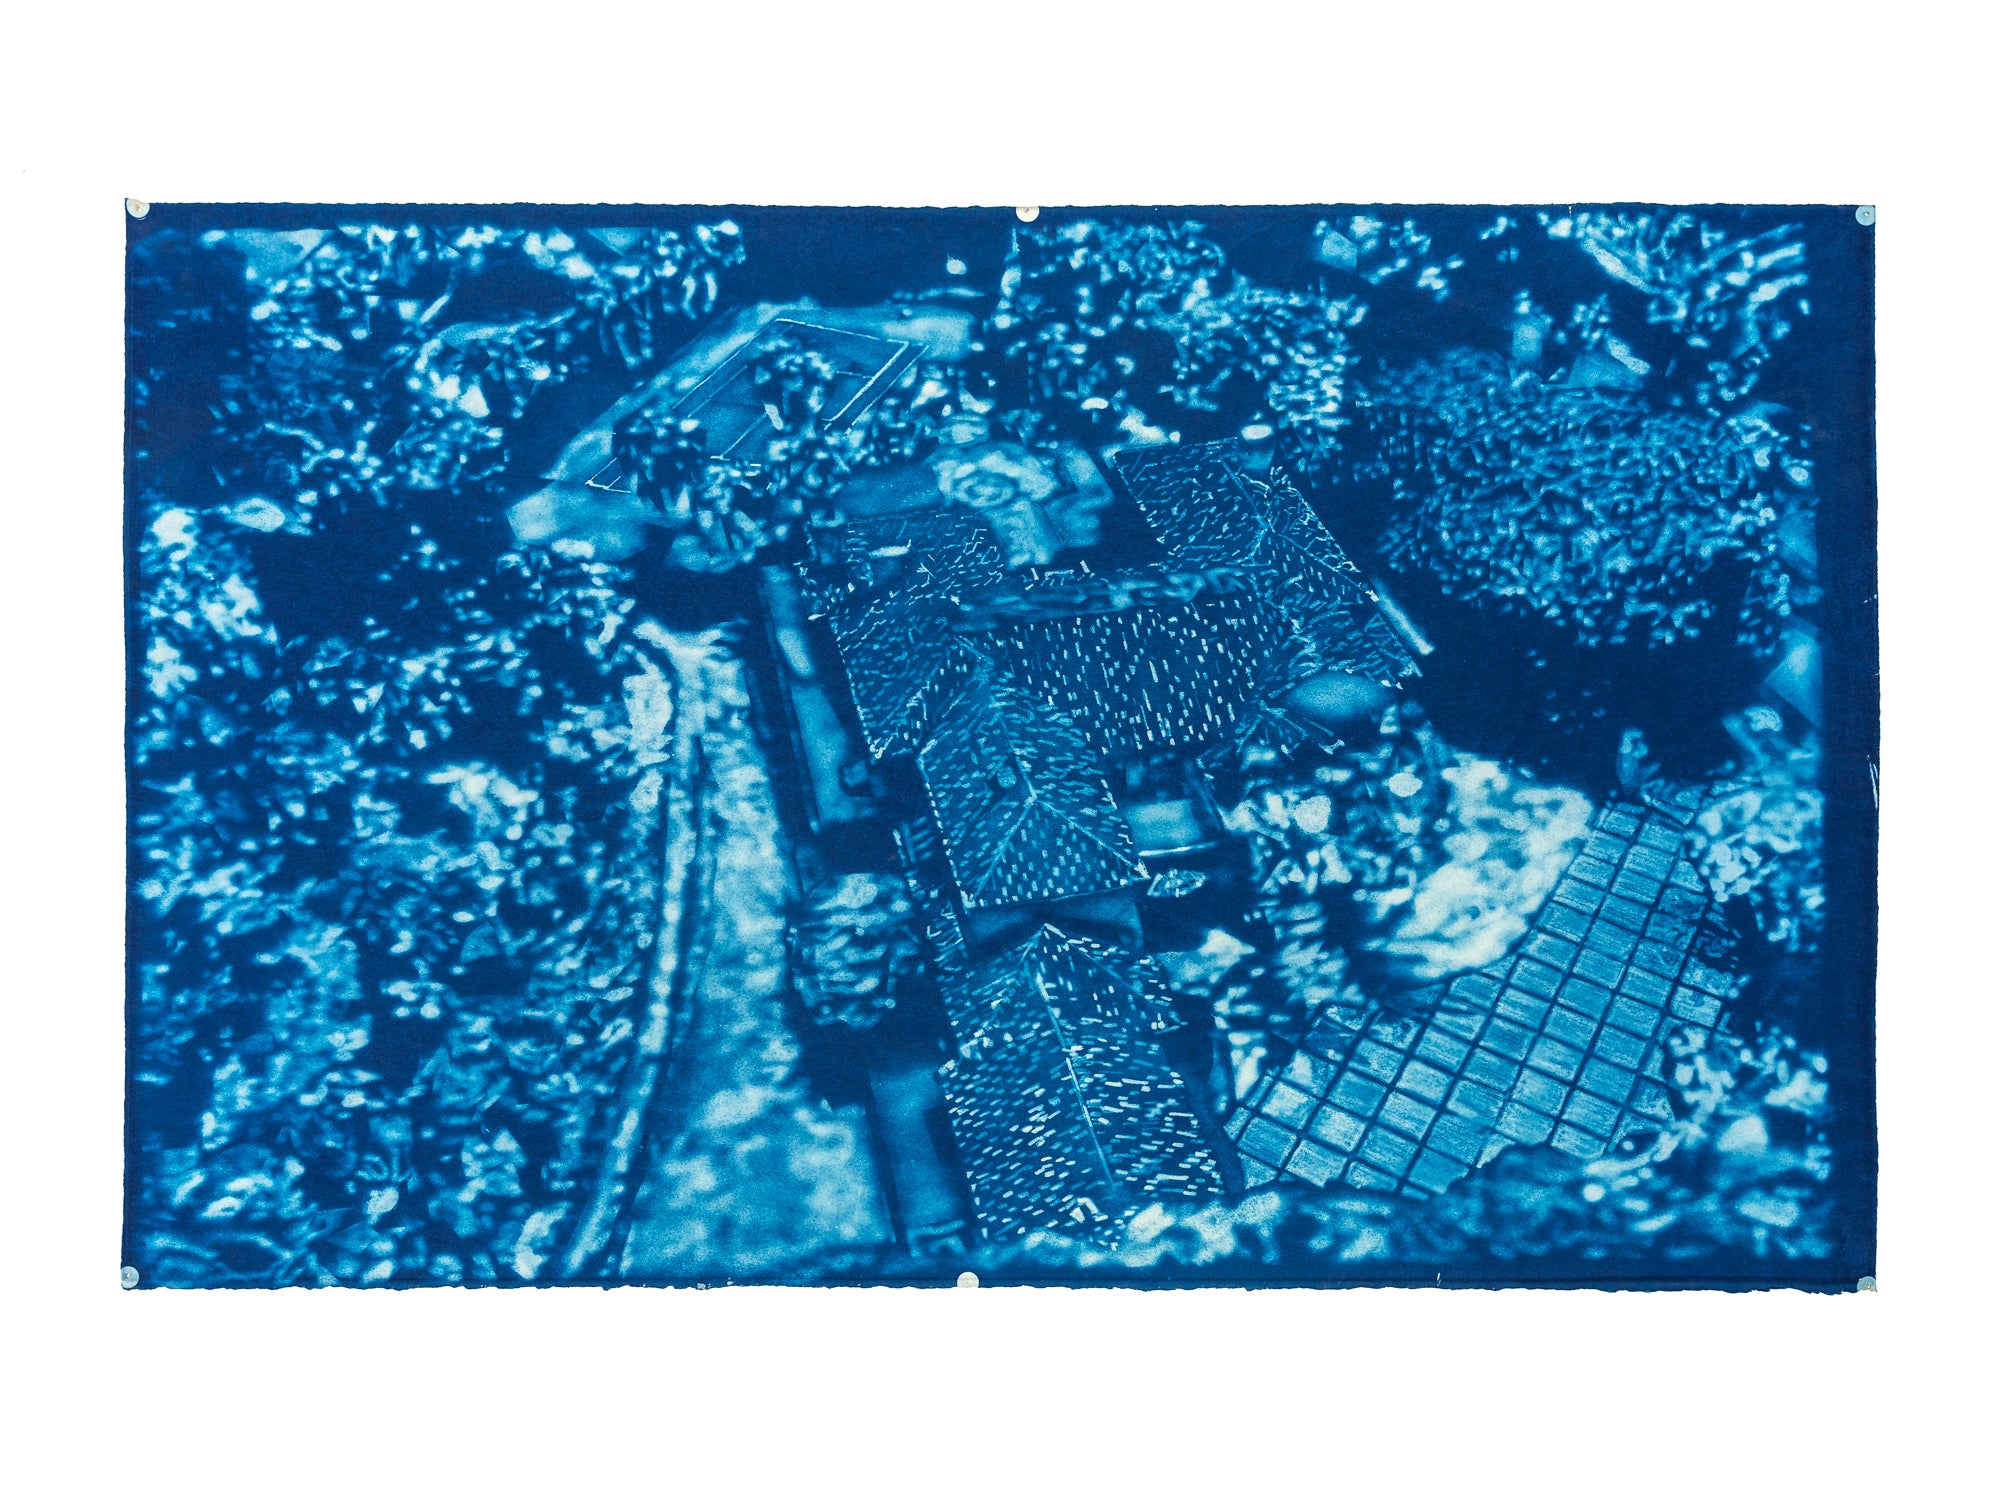 '73 BEVERLY PARK 2 (AERIAL, THERMAL)'